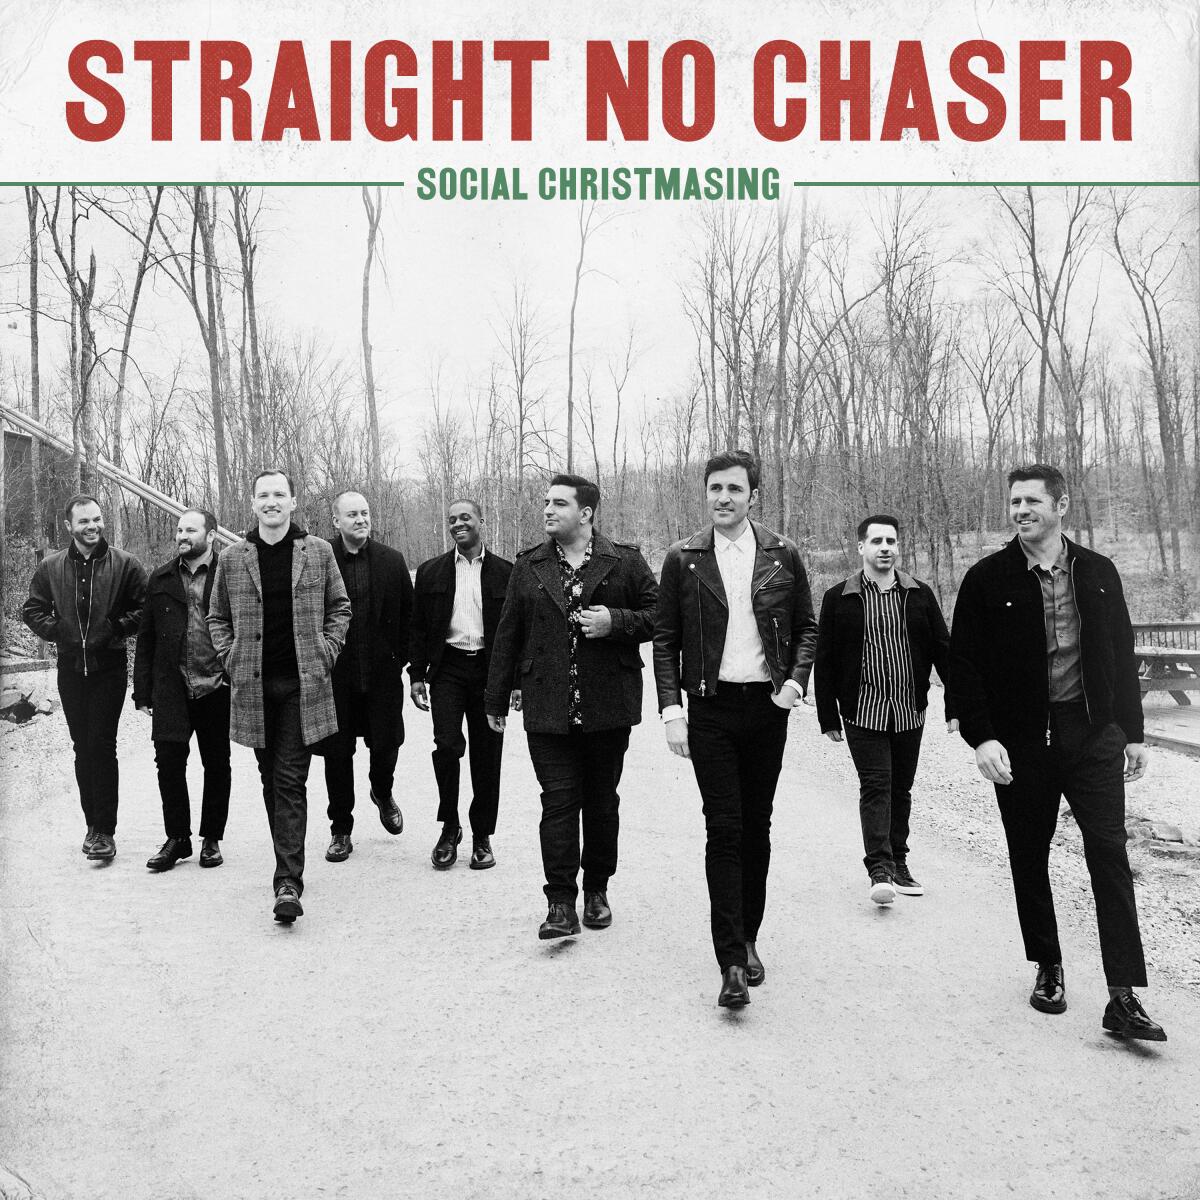 Nine men walk on a snowy road, bare trees in the background, on an album cover.